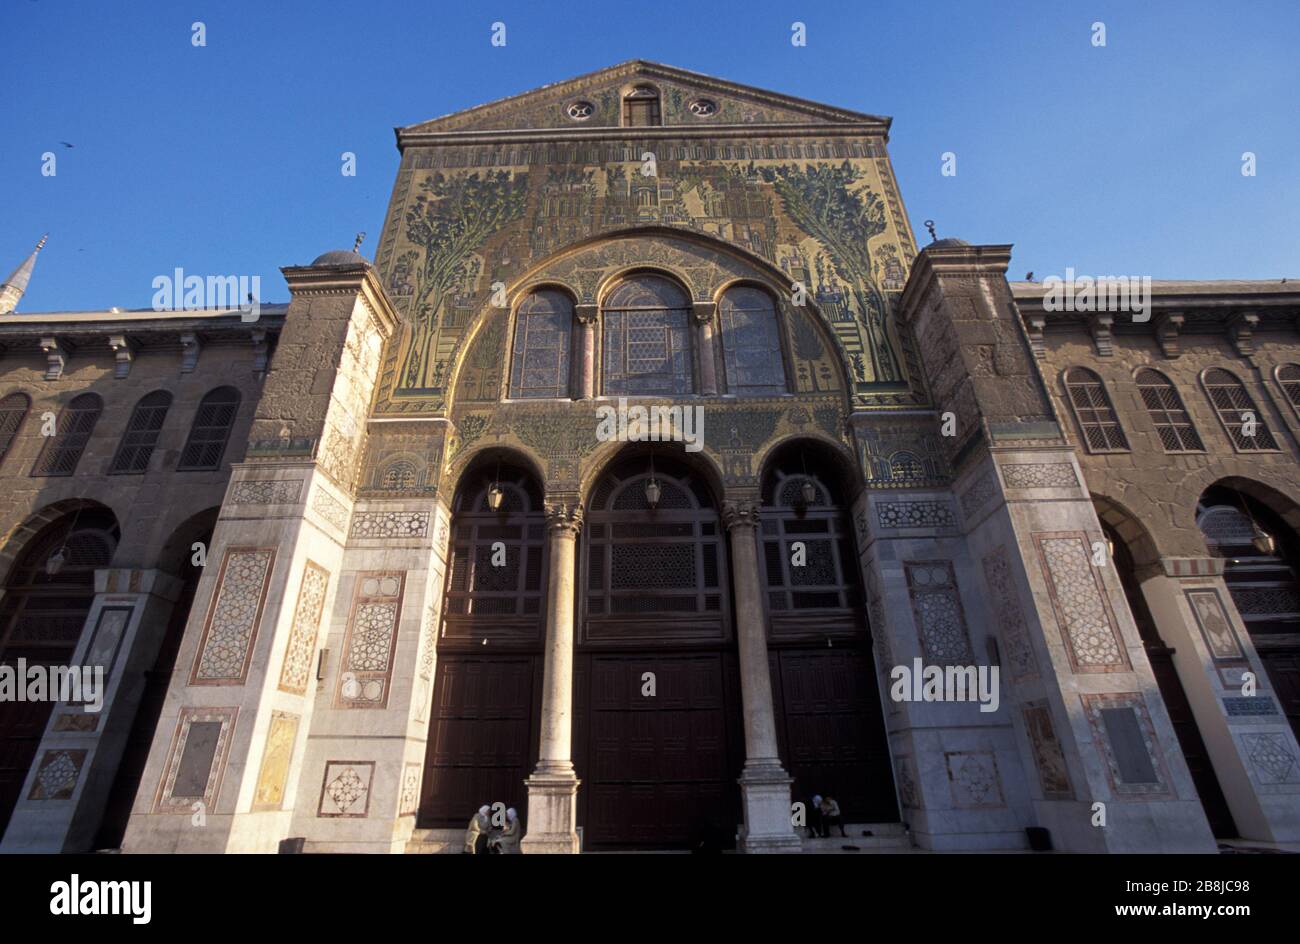 Mosaics in the Umayyad Mosque, also known as the Great Mosque of Damascus, Syria Stock Photo